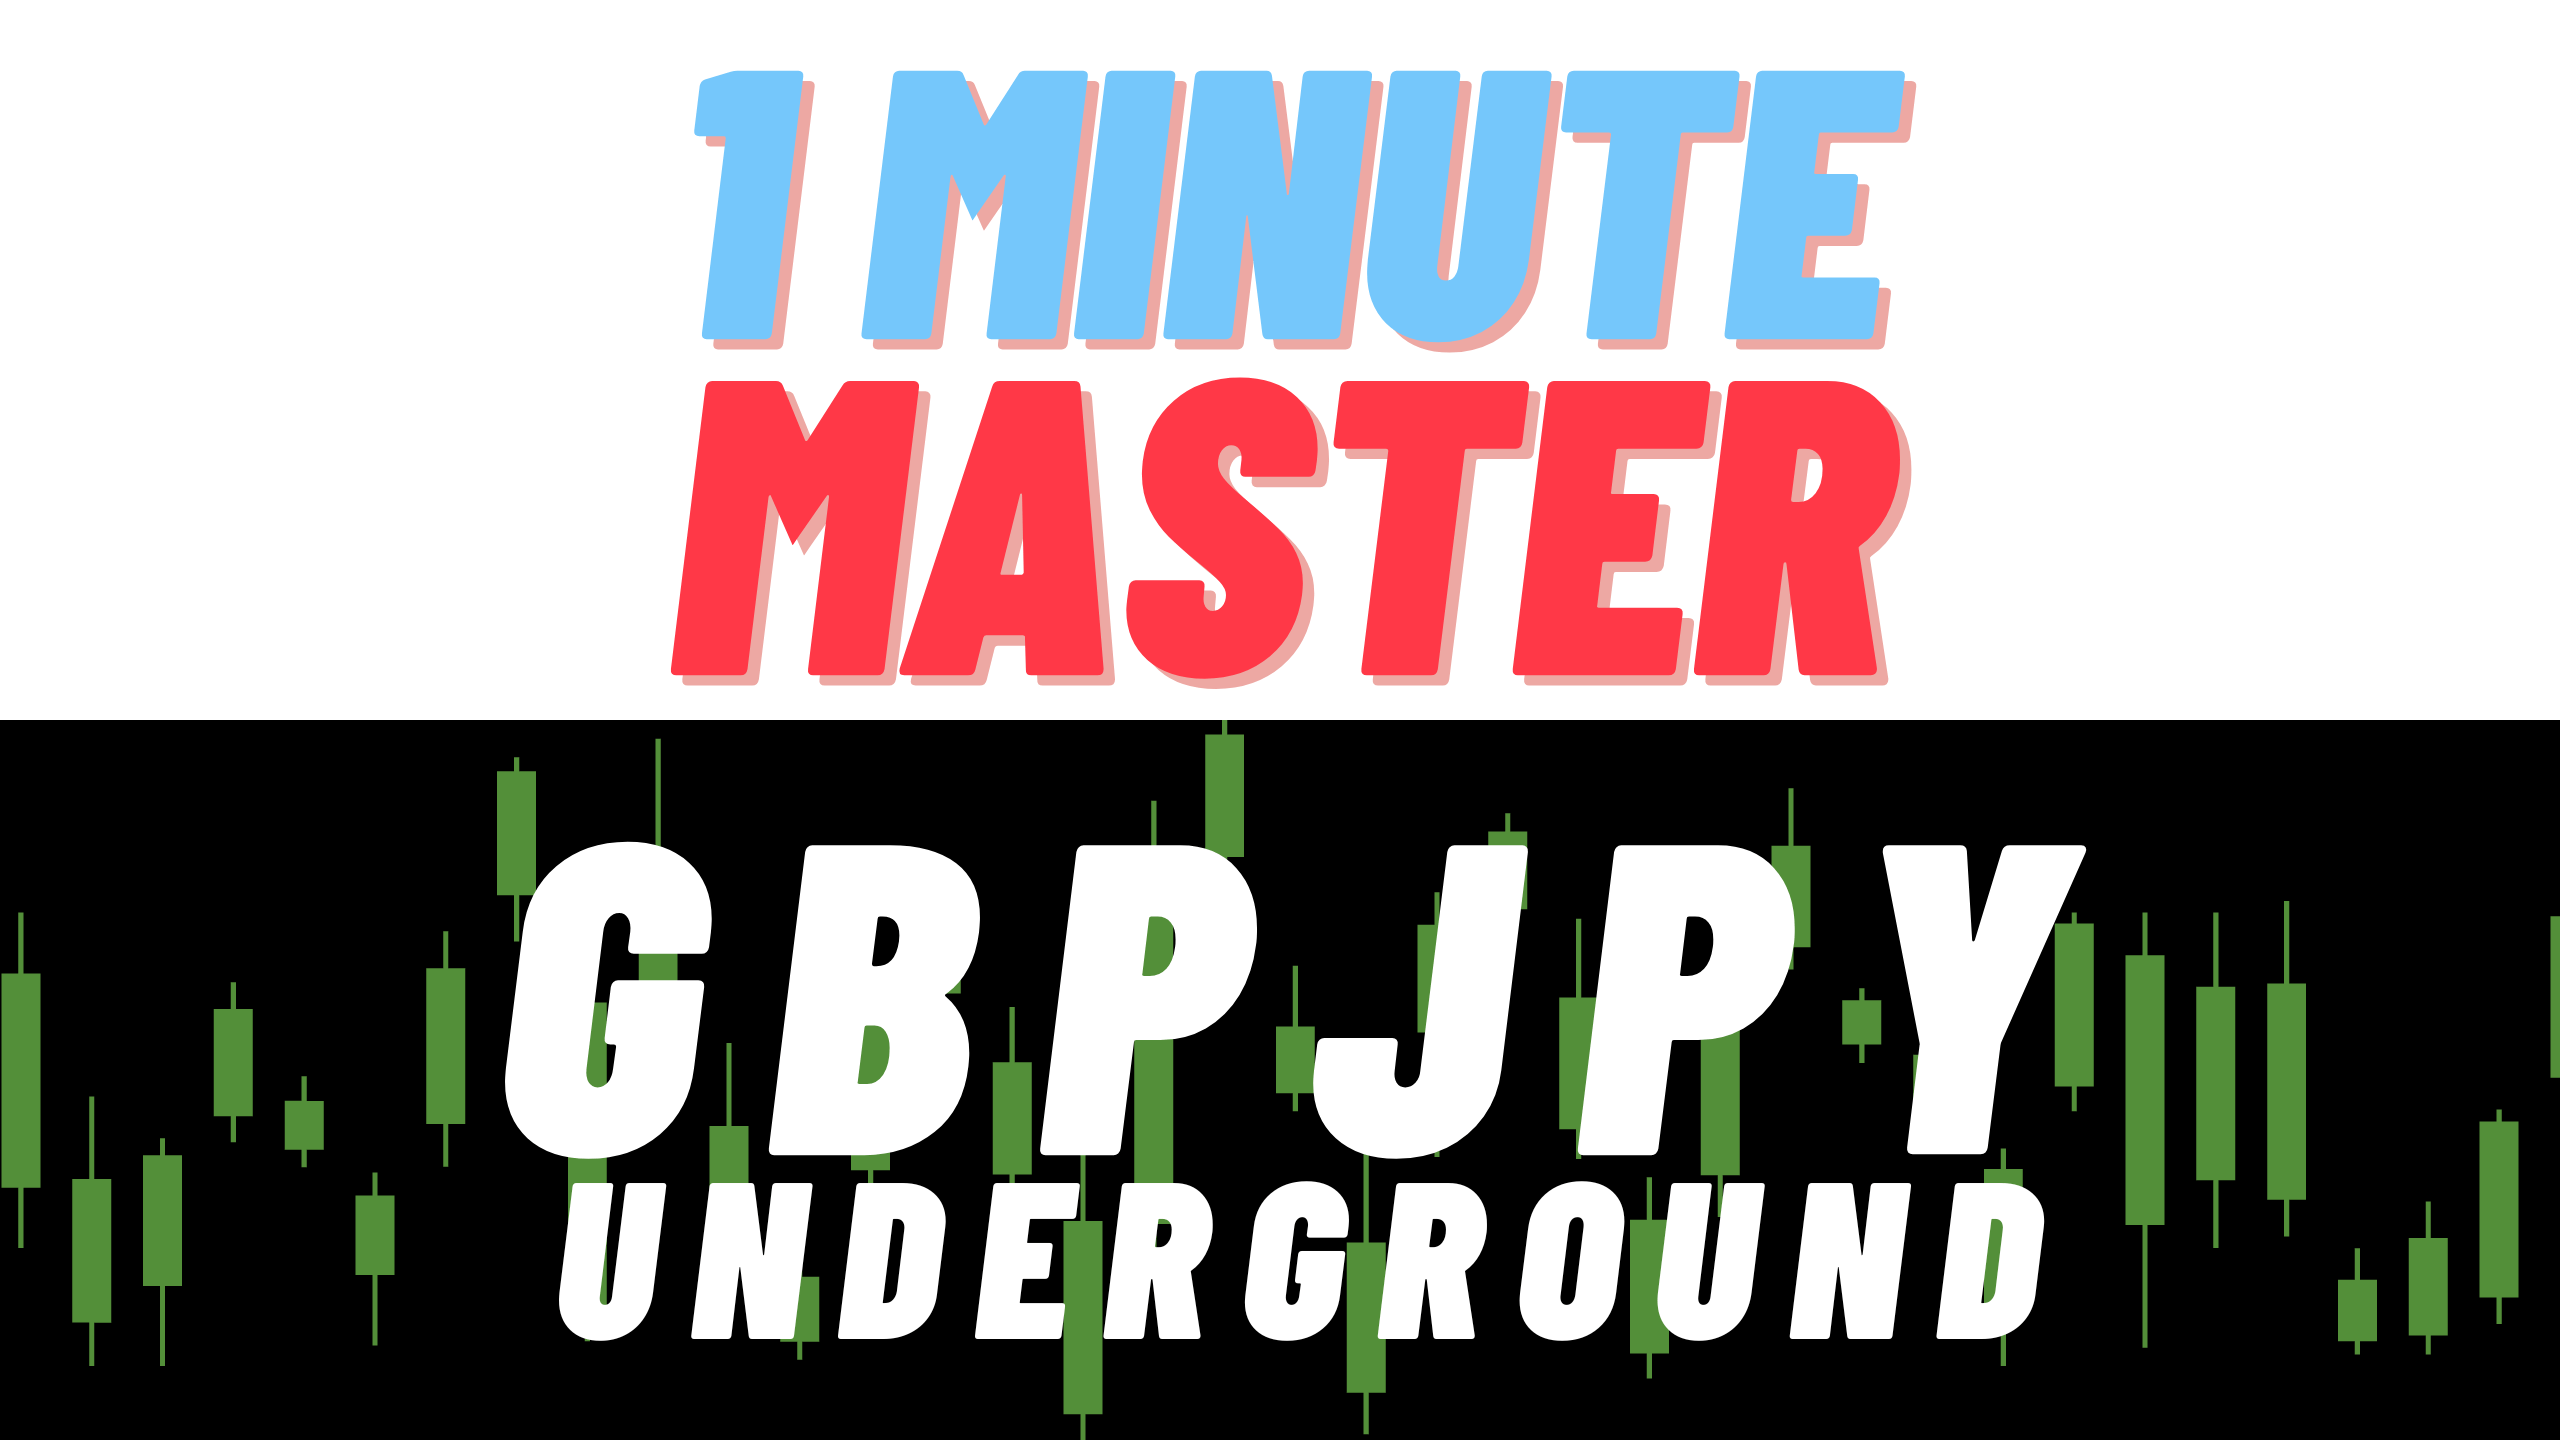 1 Minute Master - The Holy Grail Forex Strategy - 7 Setups To Conquer The Kingdom